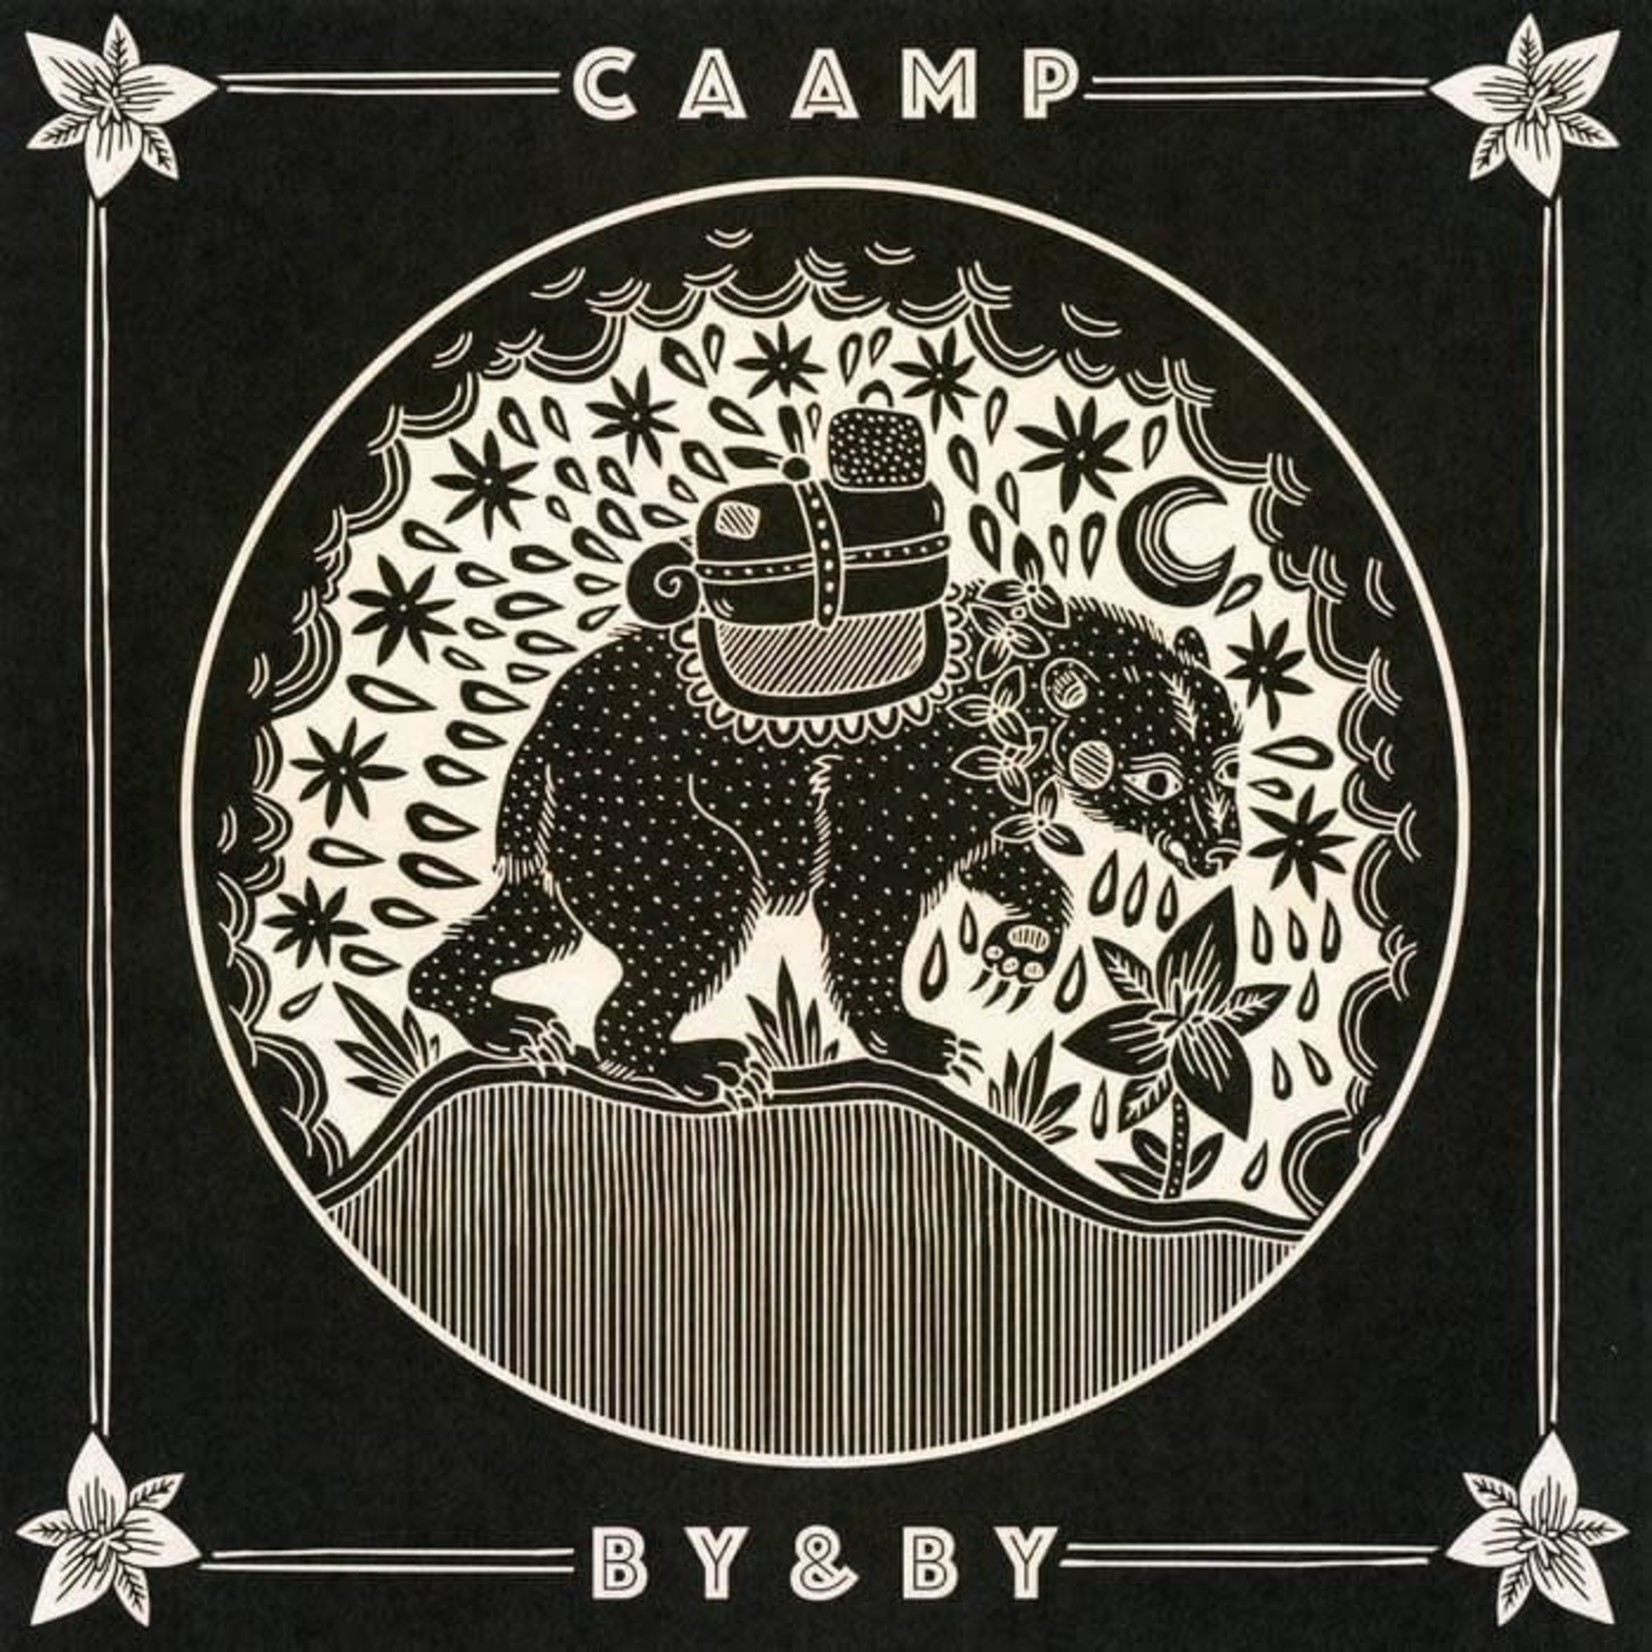 Vinyl Caamp - By and By